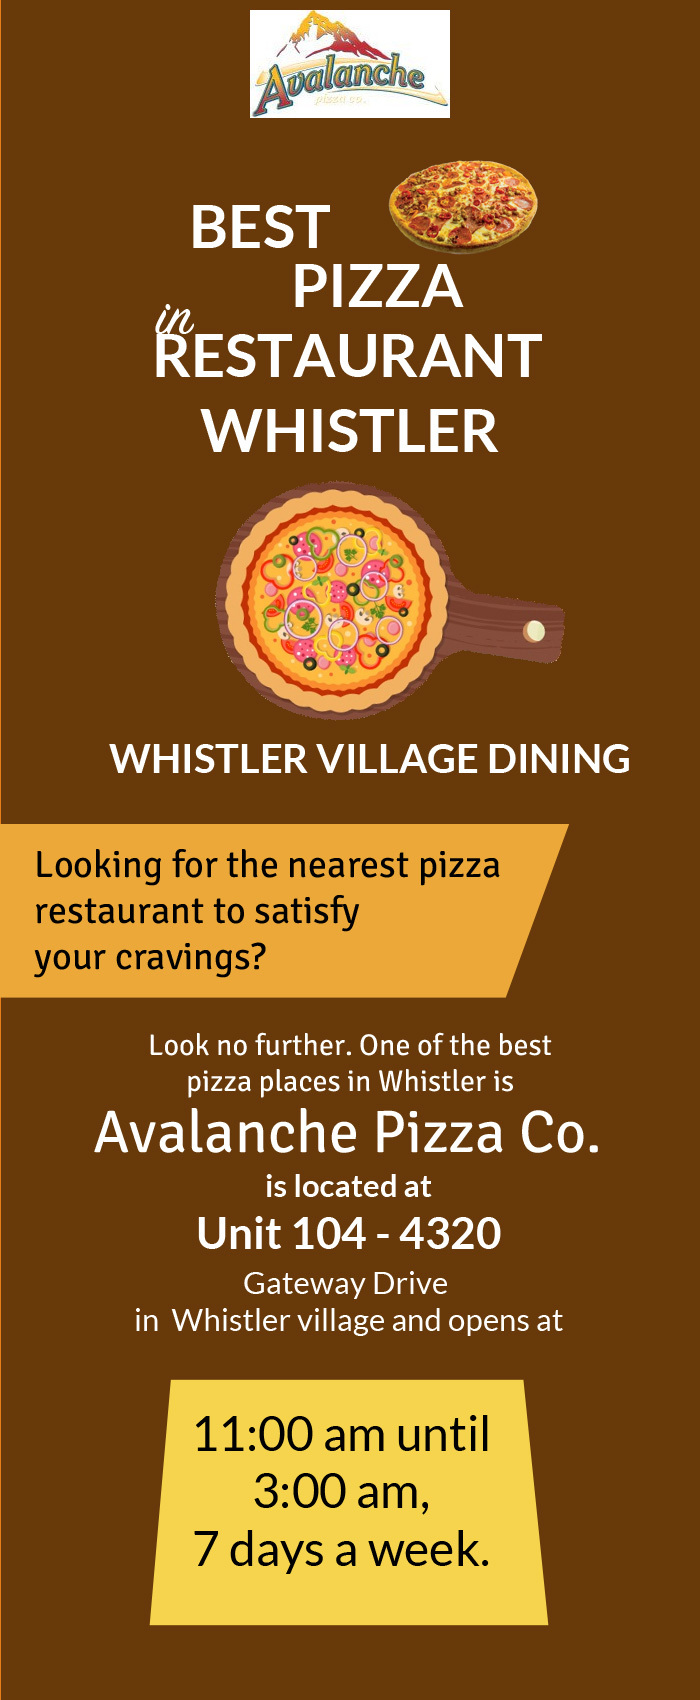 Avalanche Pizza – The Best Place to Order Pizza in Whistler